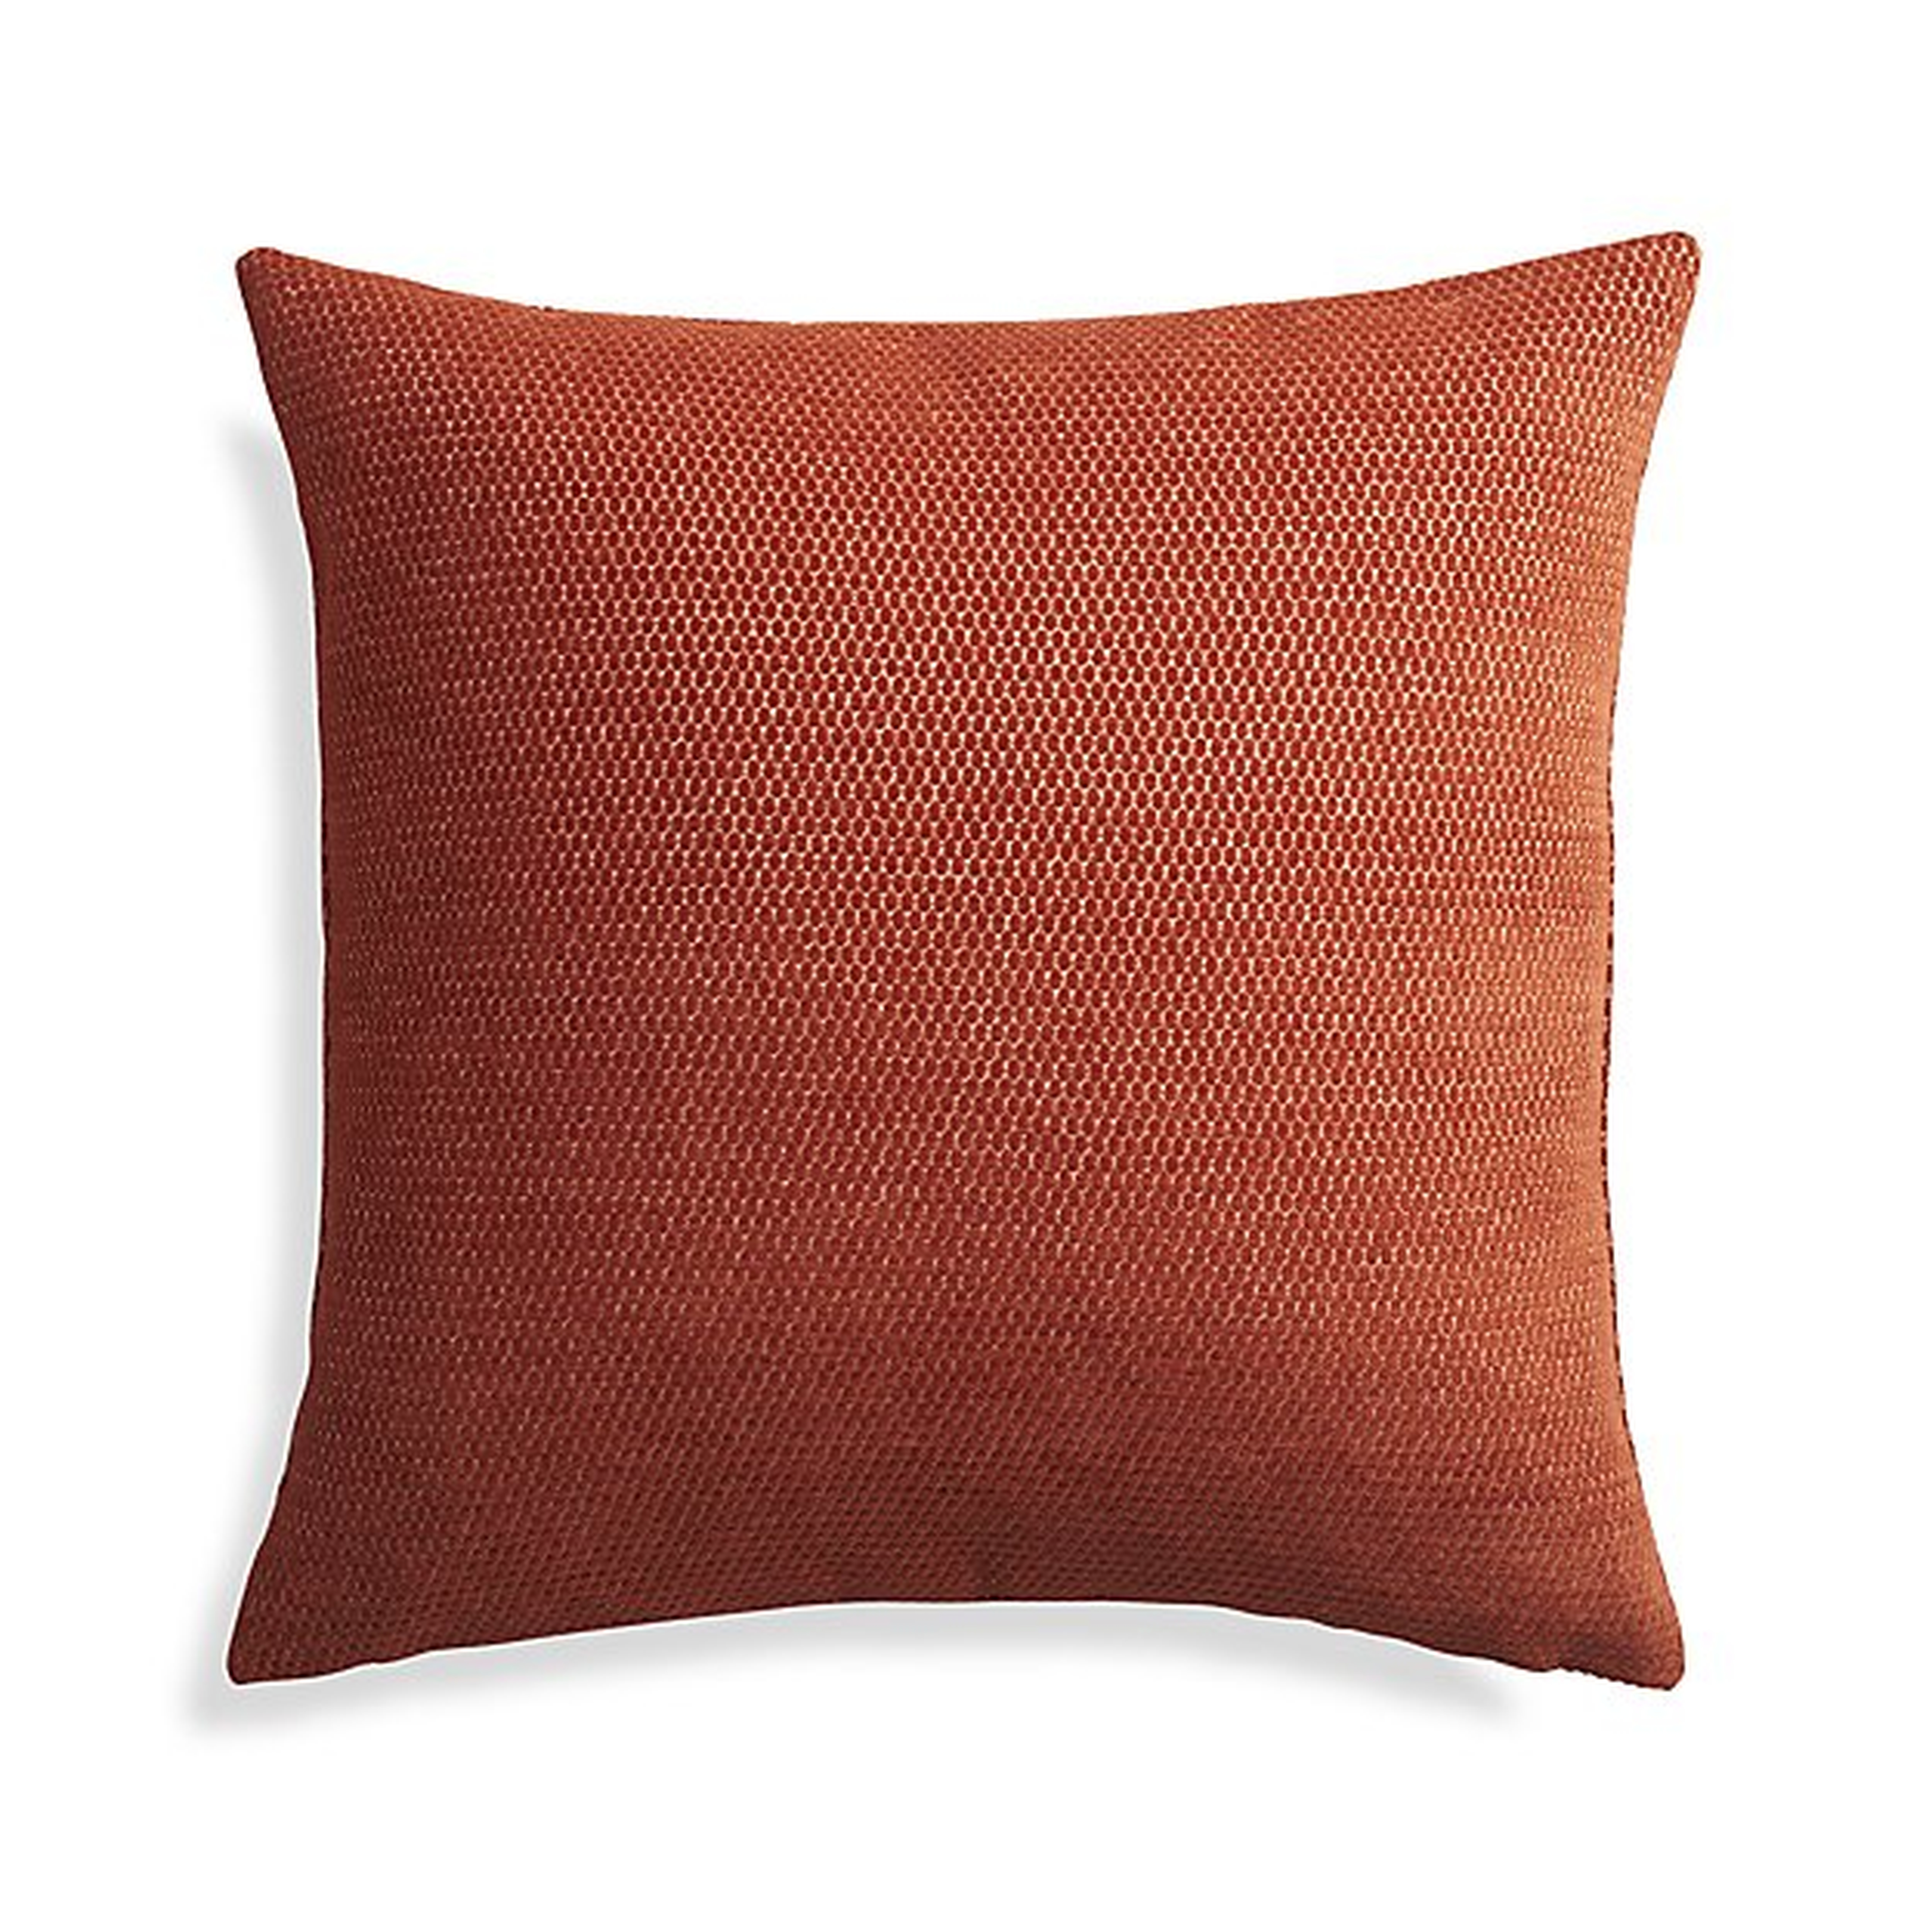 Maura Orange 23" Pillow with Down-Alternative Insert - Crate and Barrel